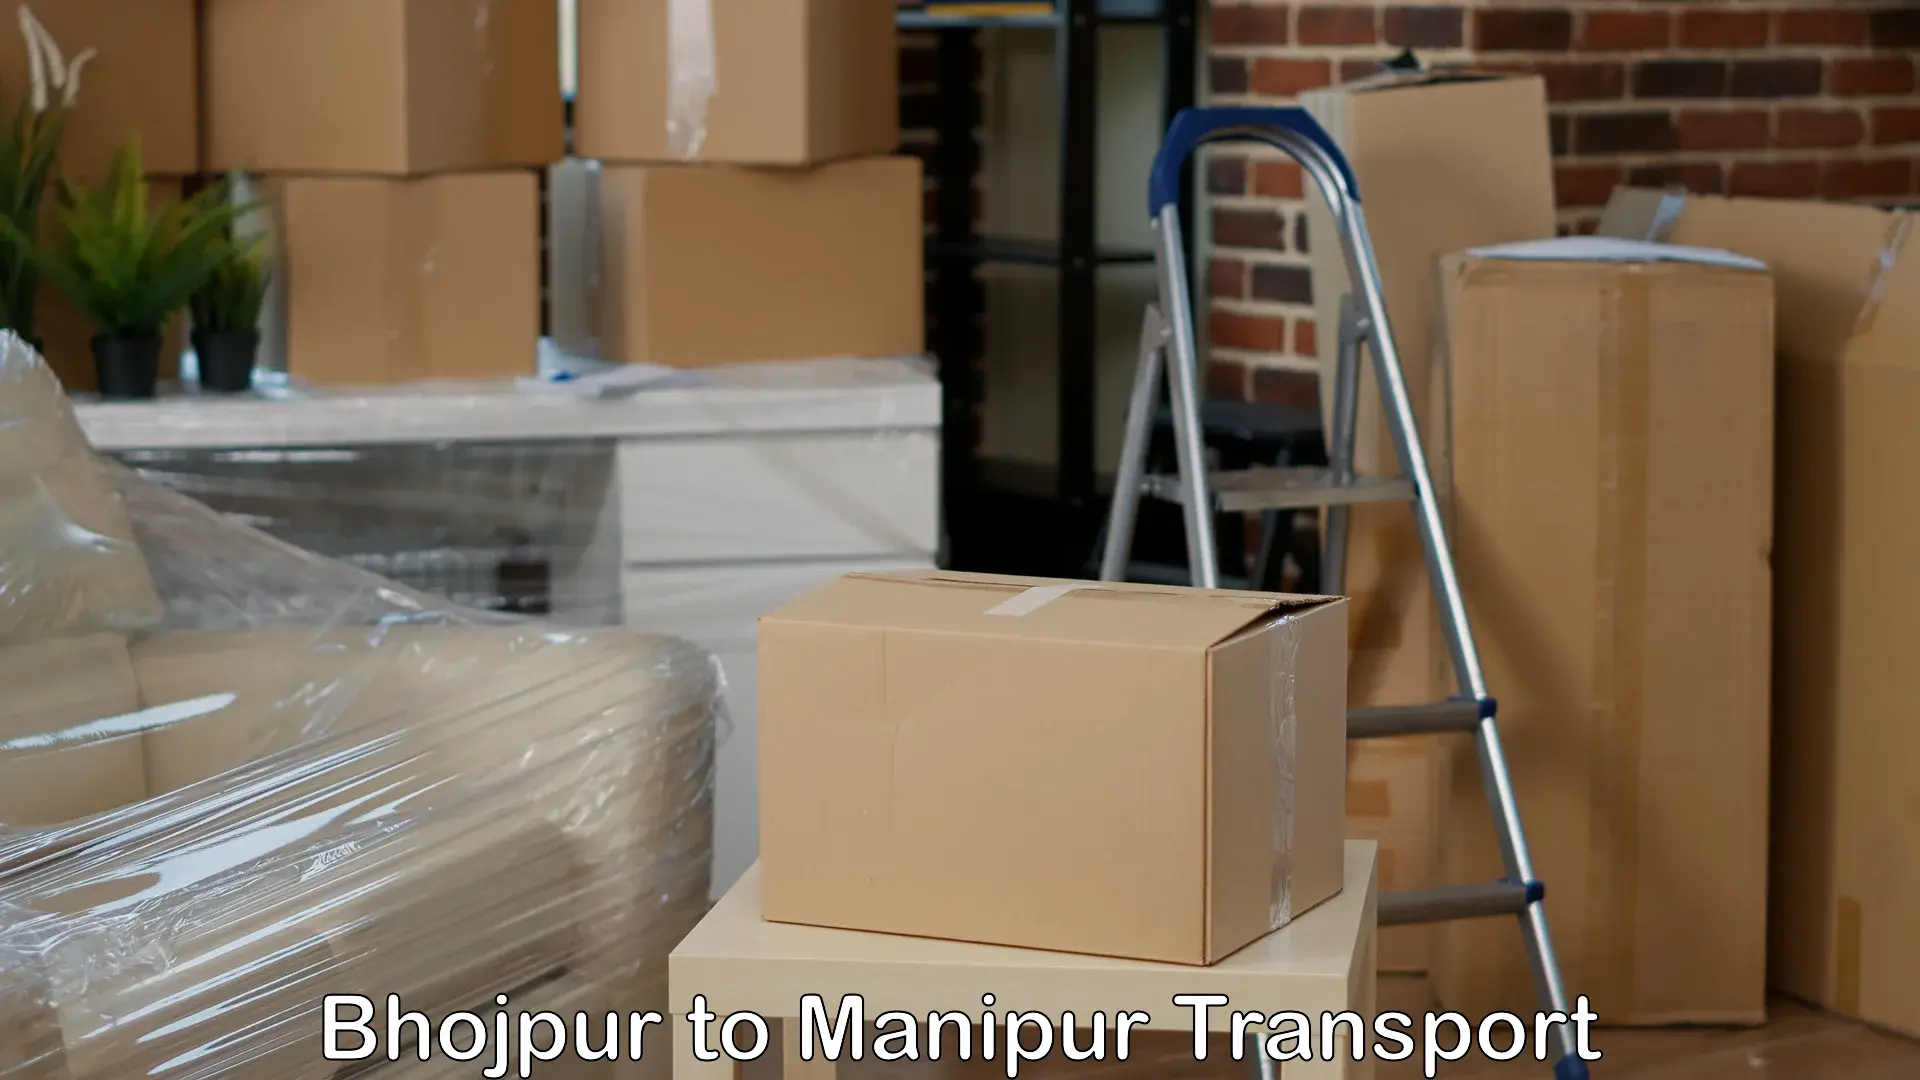 Parcel transport services Bhojpur to Chandel